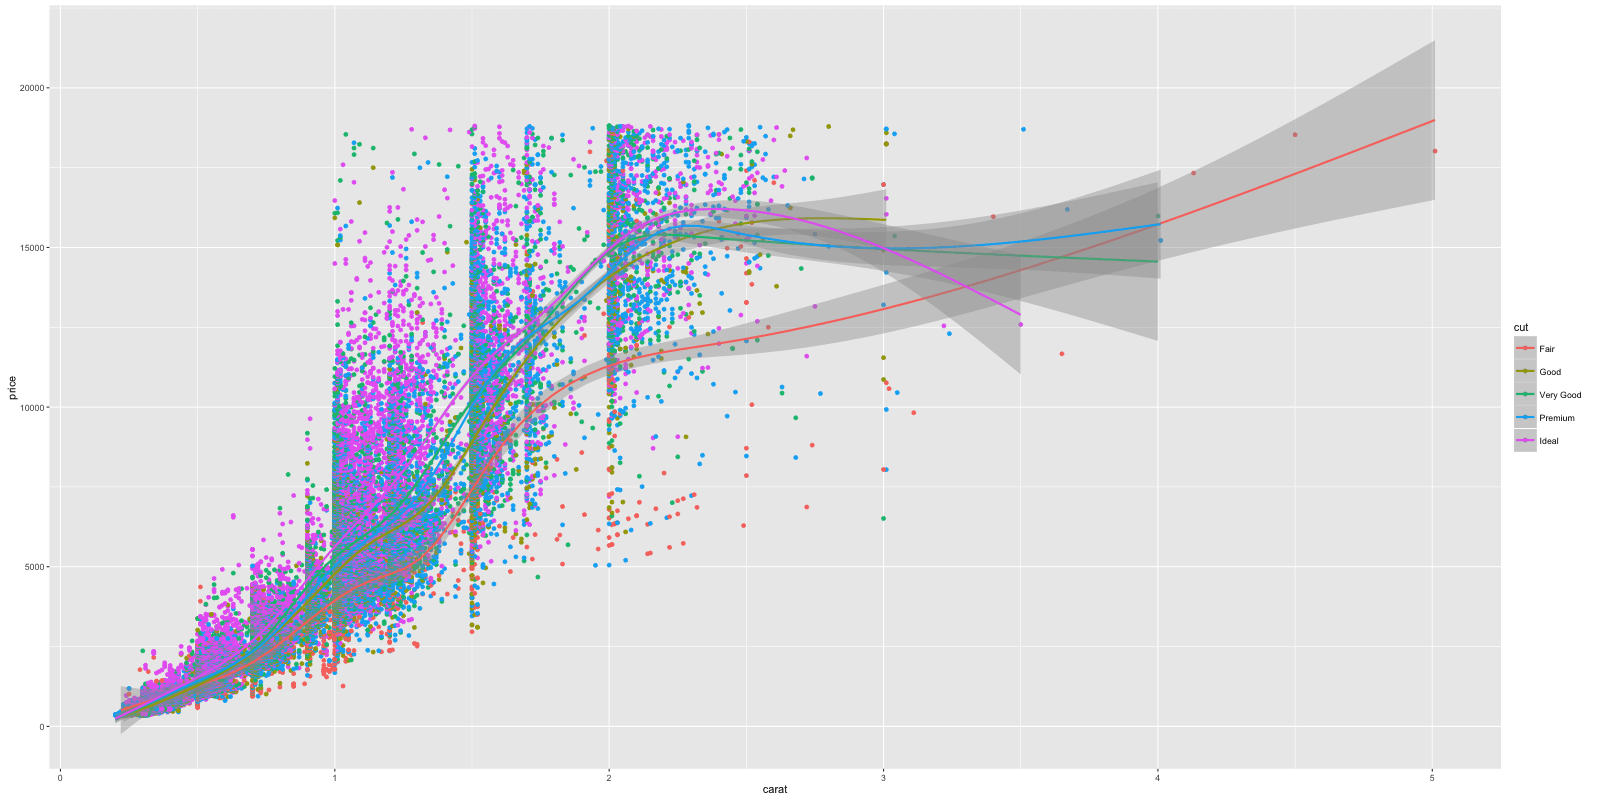 create a scatter plot ggplot2 from two data sets